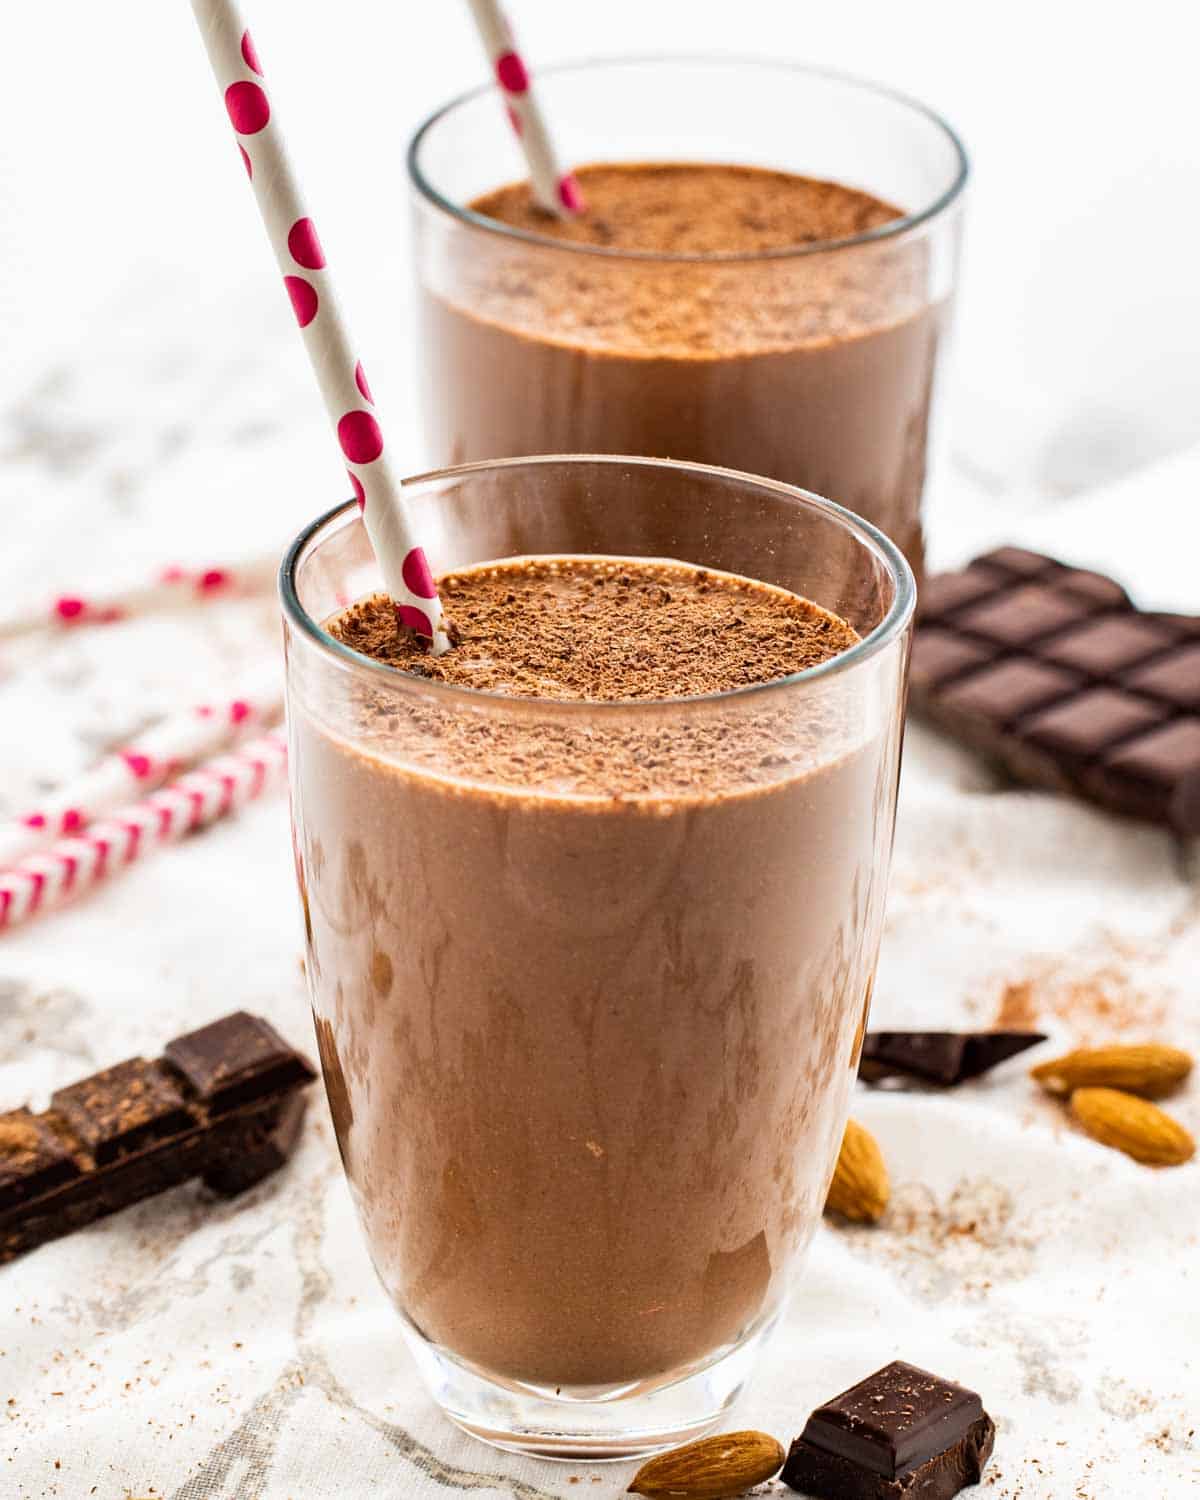 How To Make Chocolate Smoothie? 